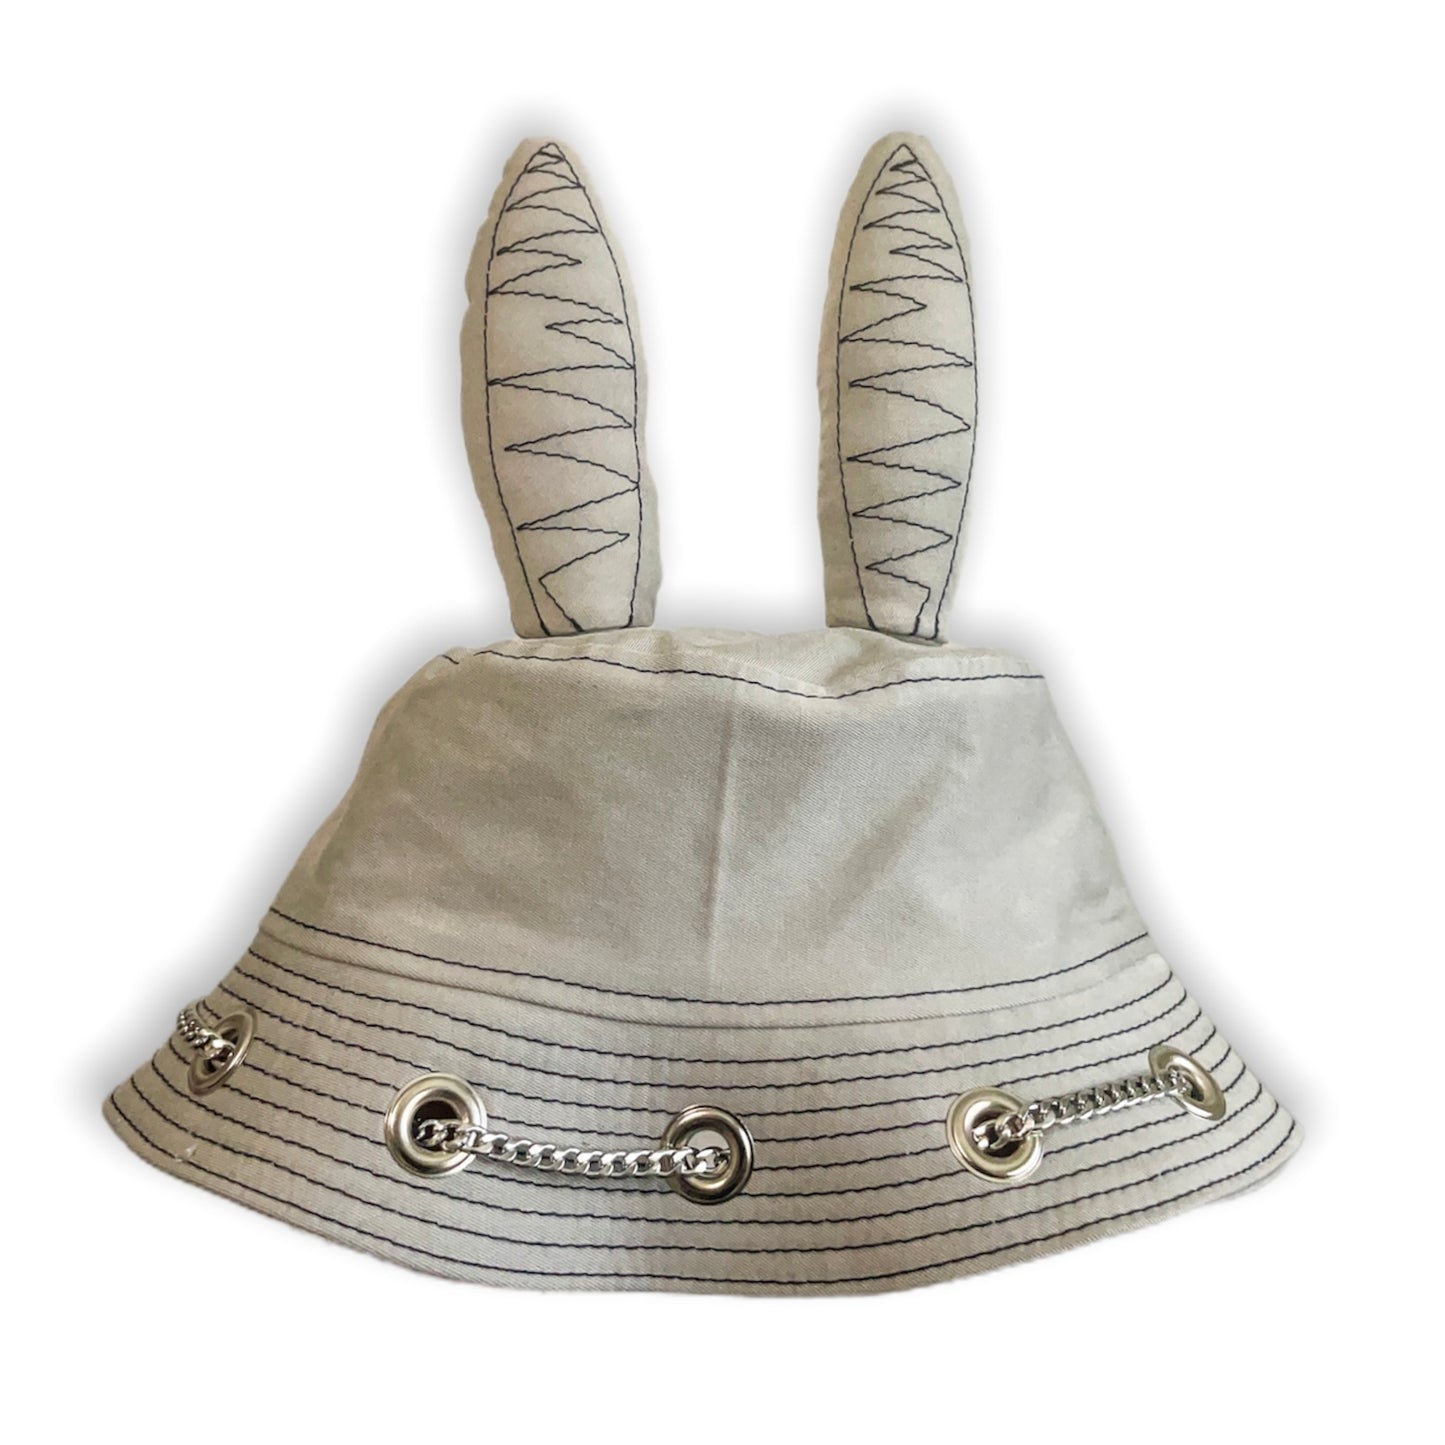 Light Stone Grey and Black Bunny Hat 1of1